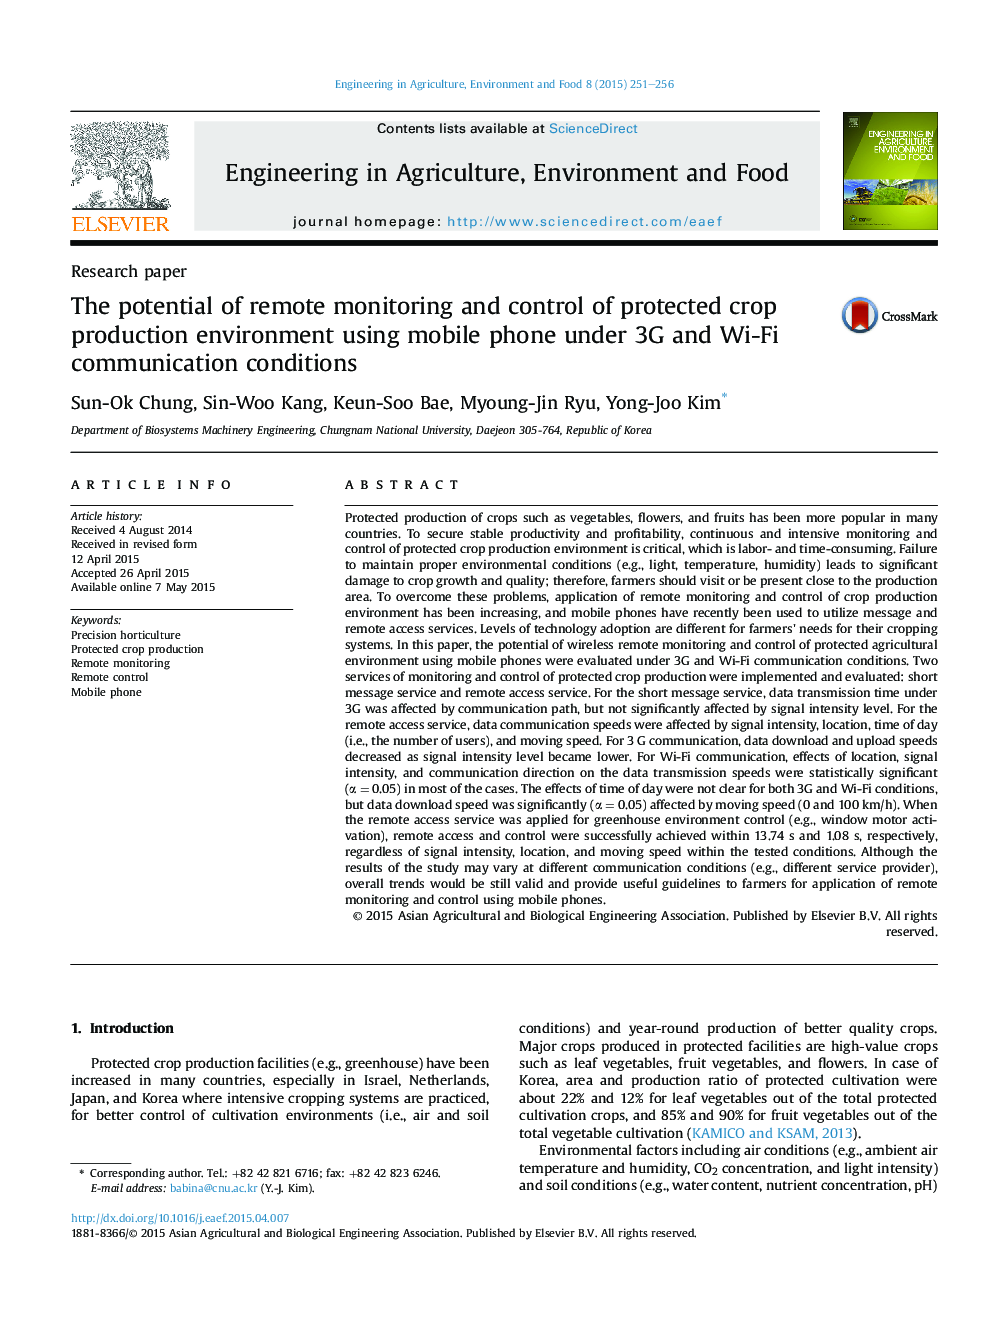 The potential of remote monitoring and control of protected crop production environment using mobile phone under 3G and Wi-Fi communication conditions